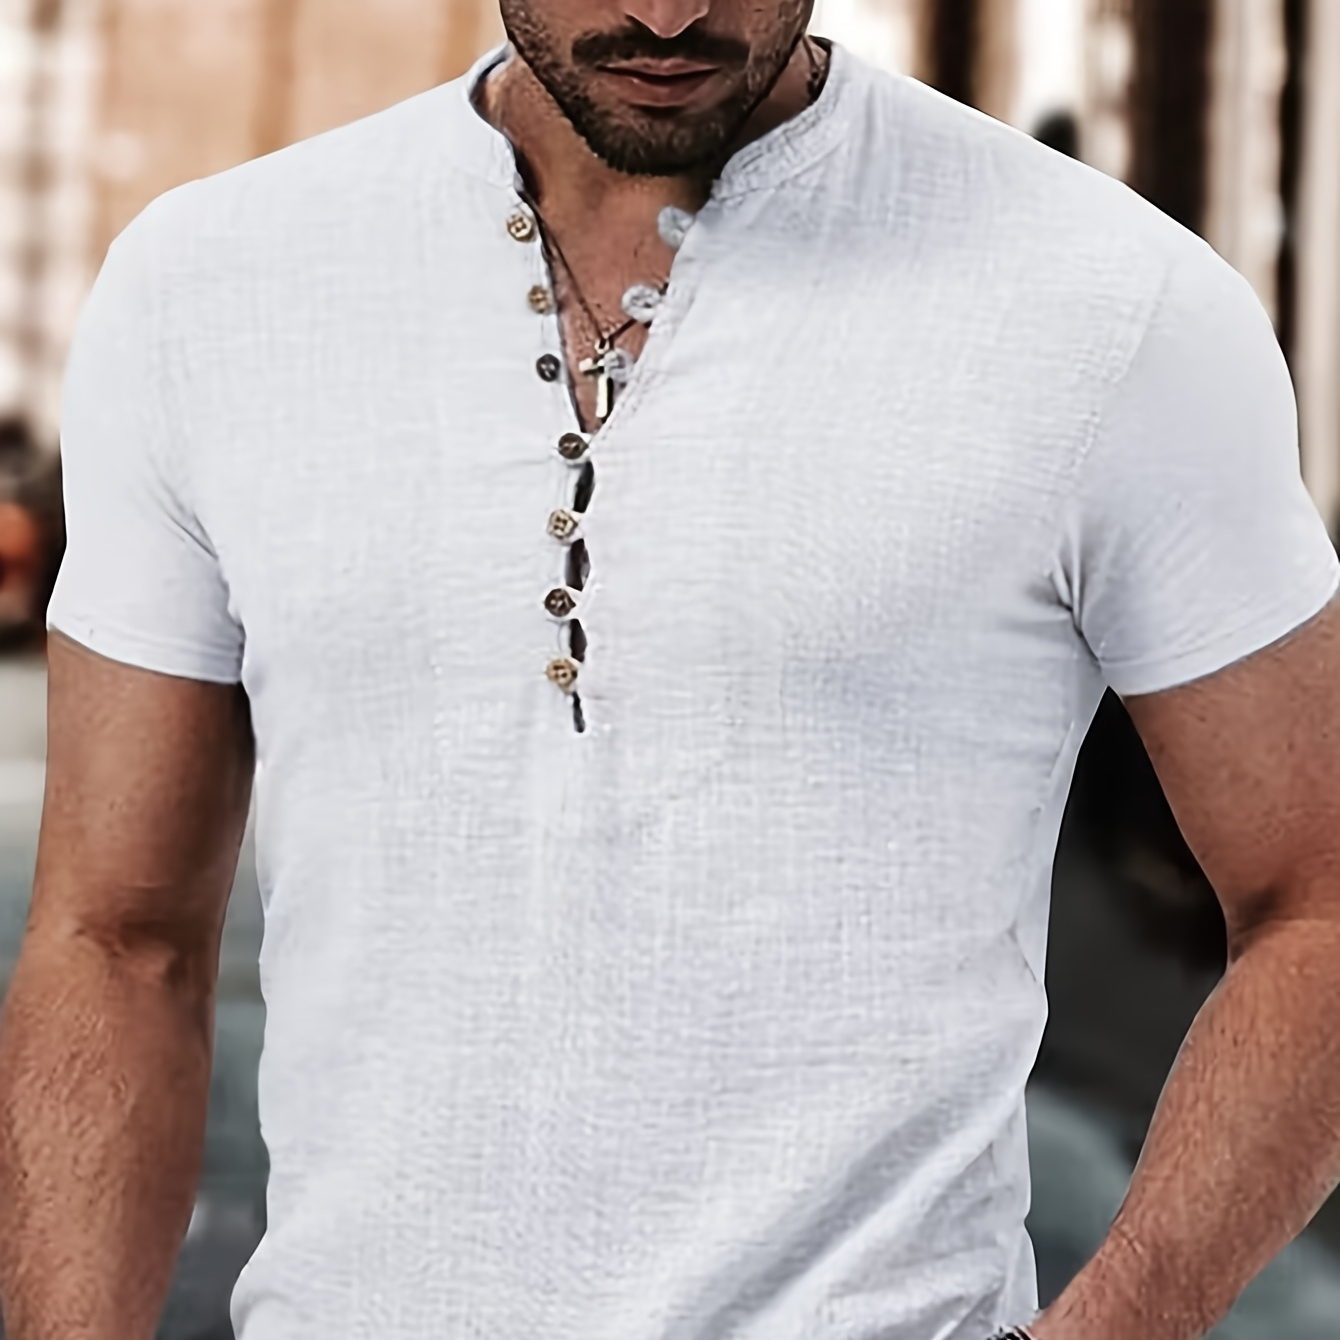 

Solid Color Men's Short Sleeve T-shirt With Deep Henley Neck, Chic And Trendy Tops For Summer Leisurewear And Vacation Resorts, Comfy And Breathable Tees For Men